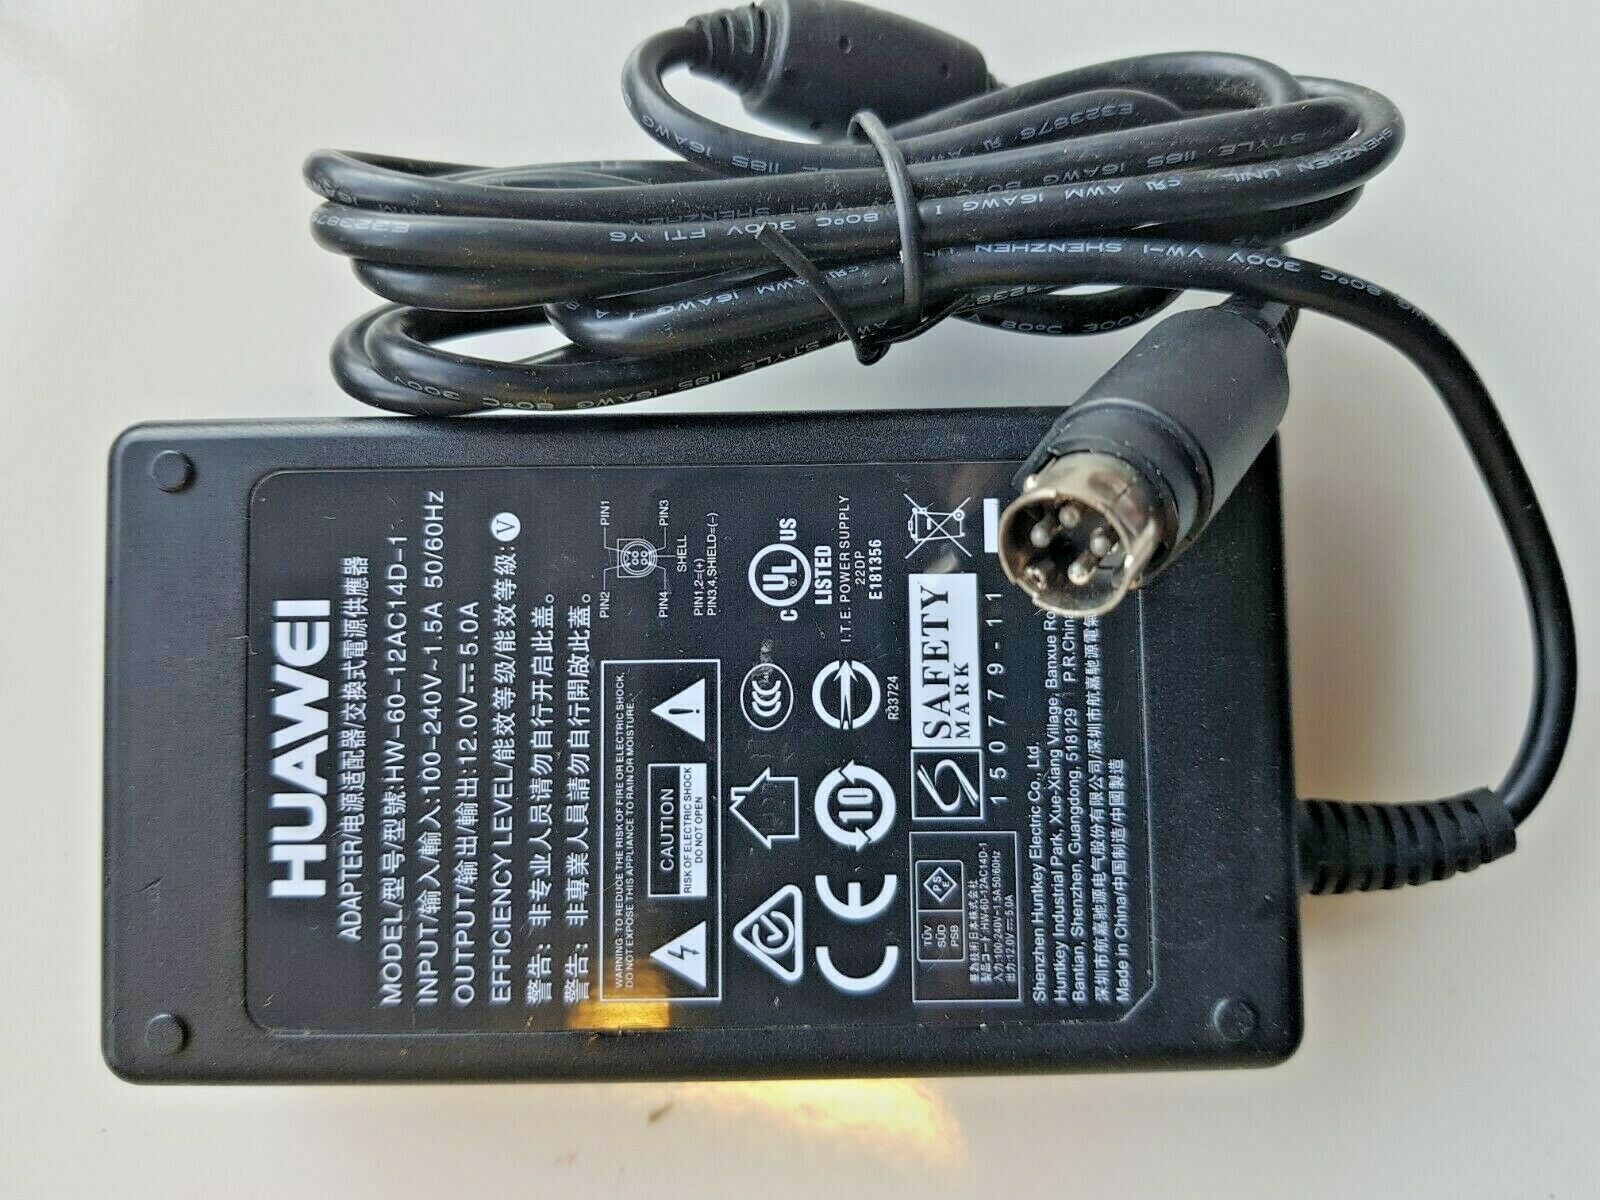 *Brand NEW* HUAWEI HW-60-12AC14D-1 12V 5A 4 PIN DIN 4 ROUTER ADAPTER POWER SUPPLY - Click Image to Close